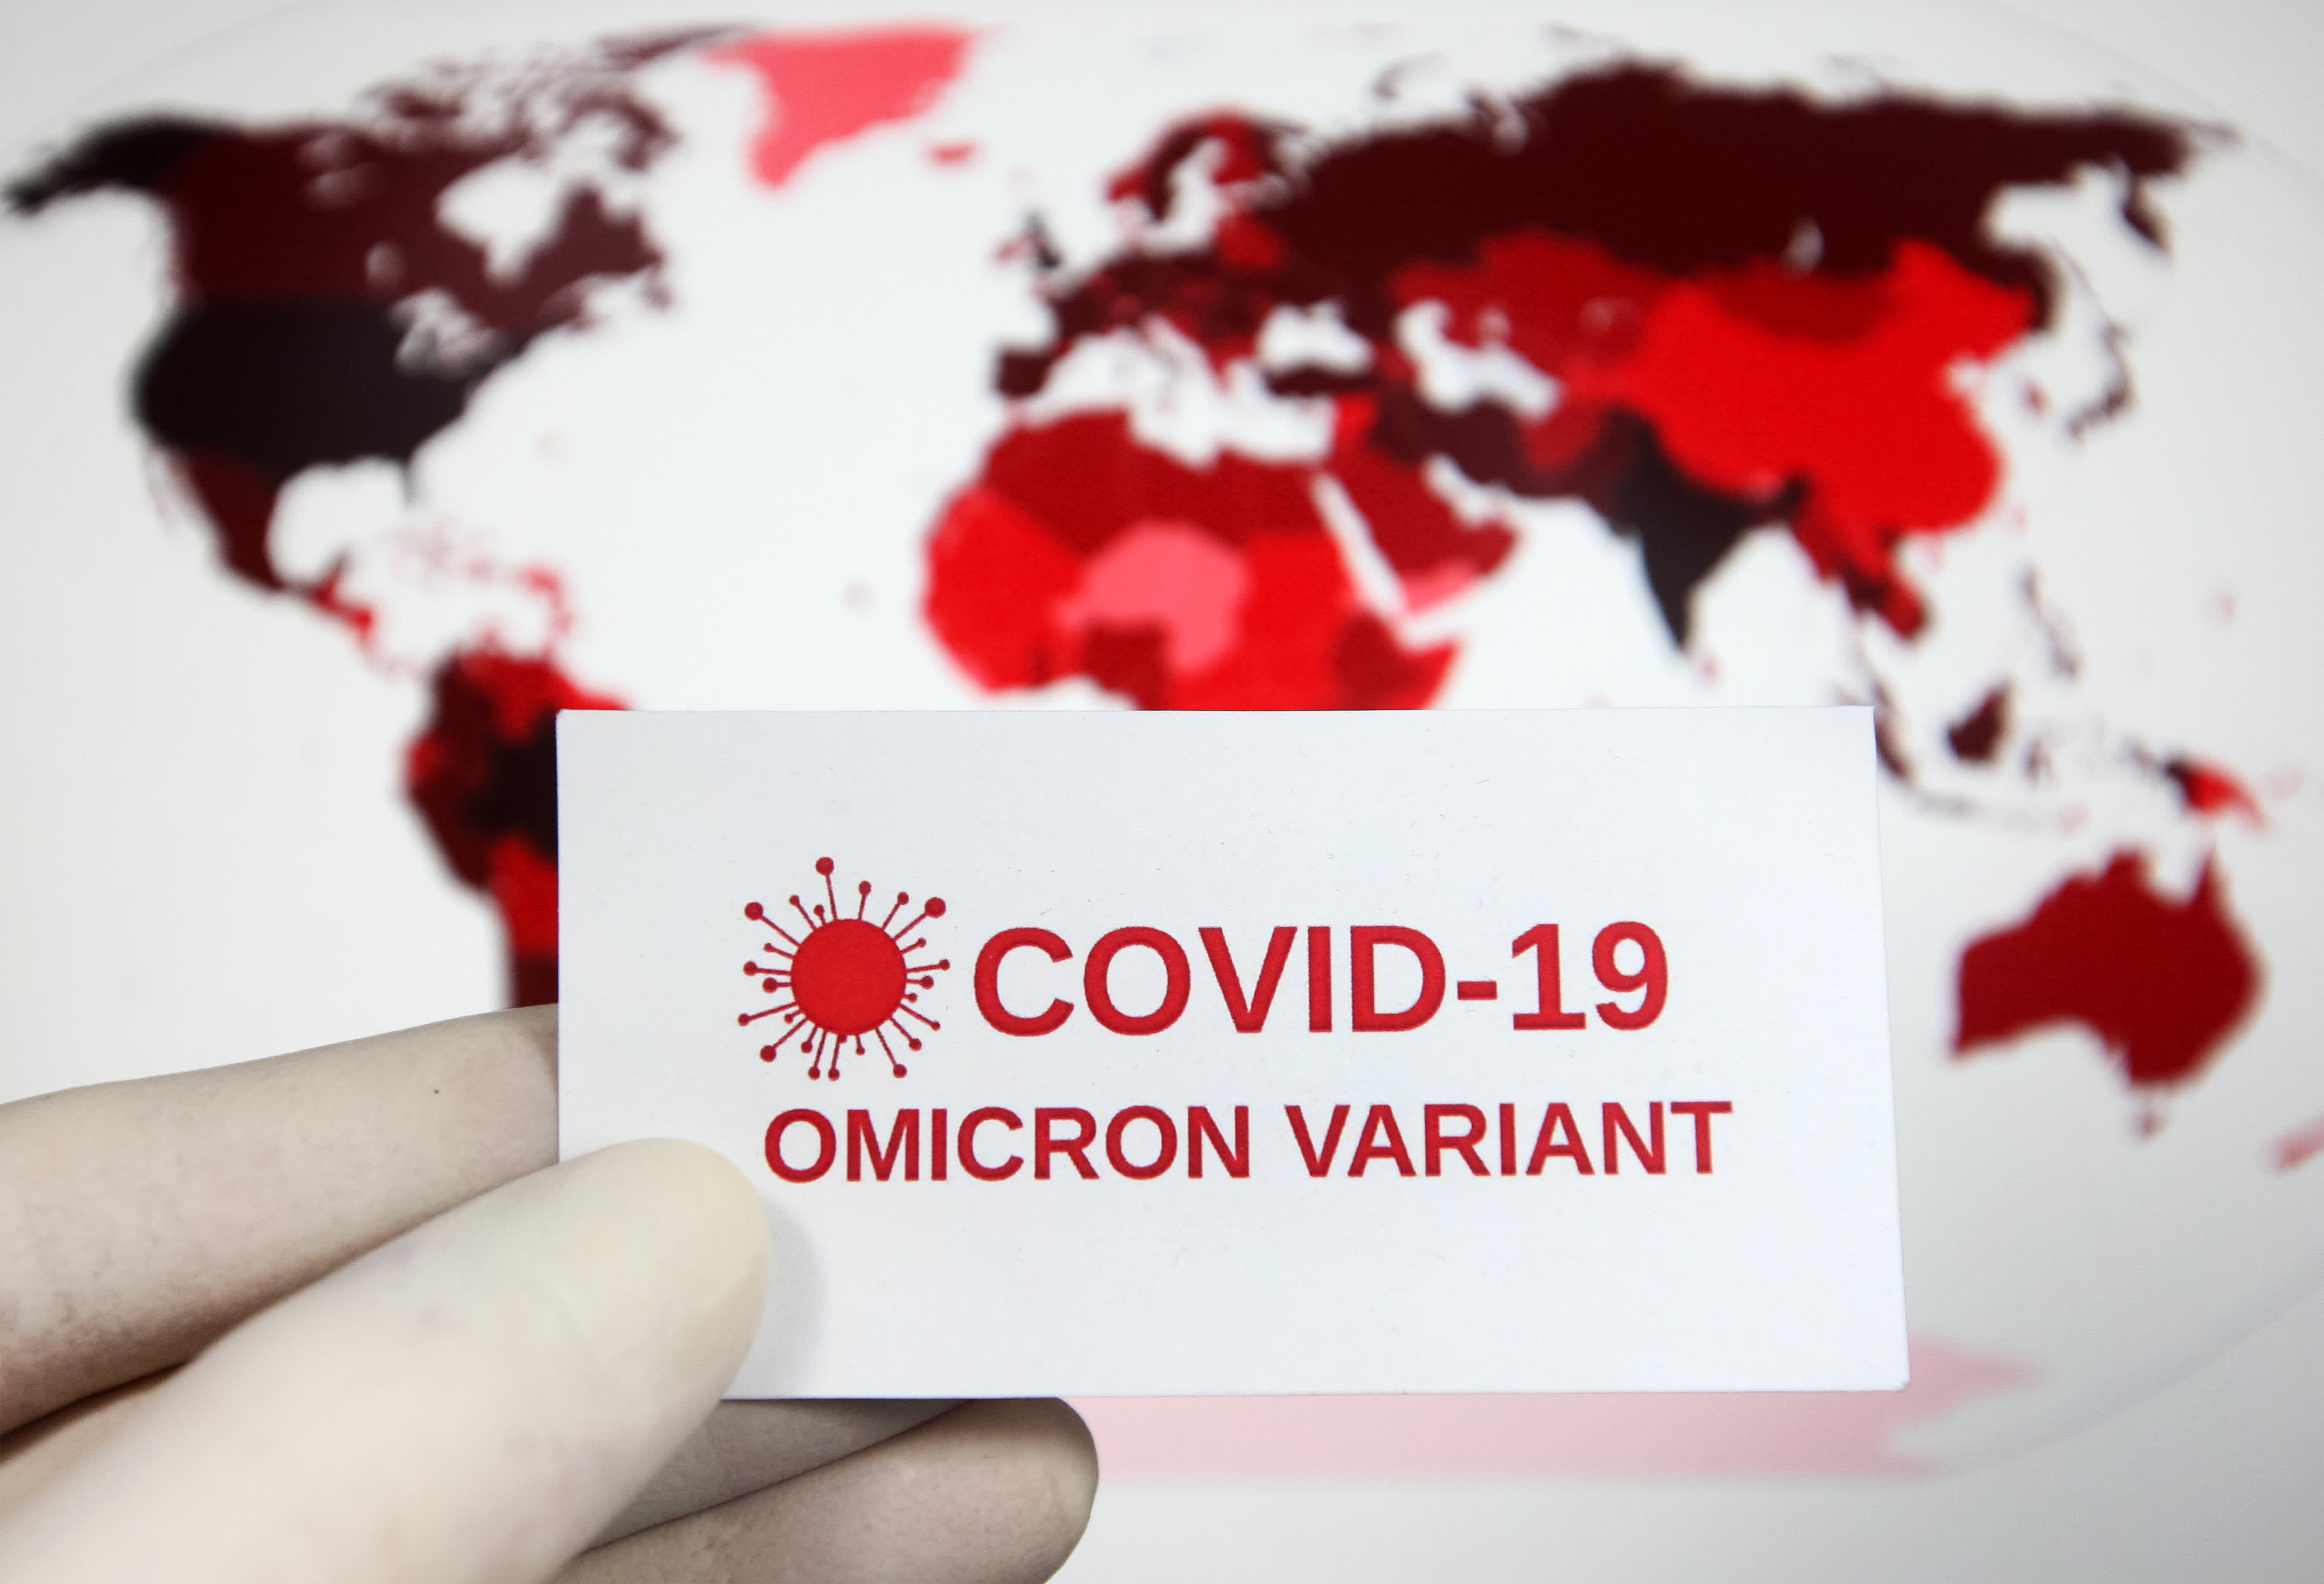 Omicron Covid variant poses greater risk for the unvaccinated, former White House advisor says - CNBC